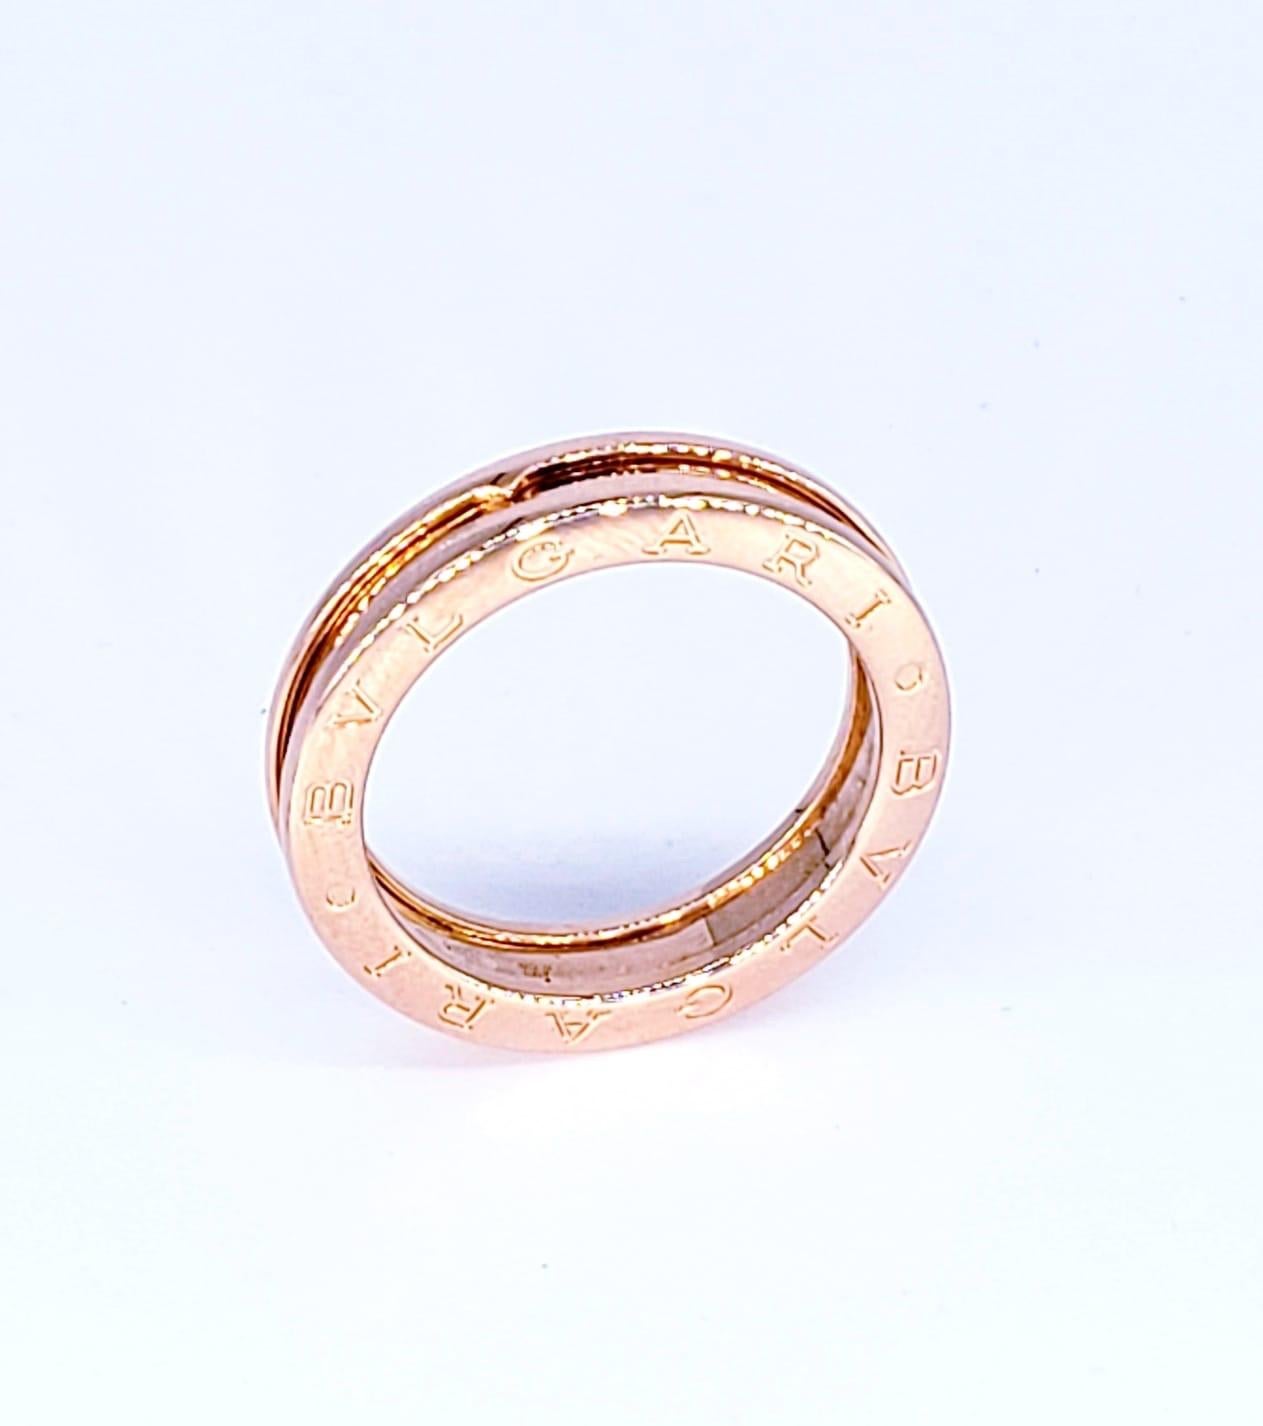 Bvlgari Classic 18k Rose Gold Wedding Band. Famous designer Bvlgari wedding ring size 9 and cannot be resized. The ring measures height 5mm and weights 8 grams solid 18k rose gold. Stamped 750